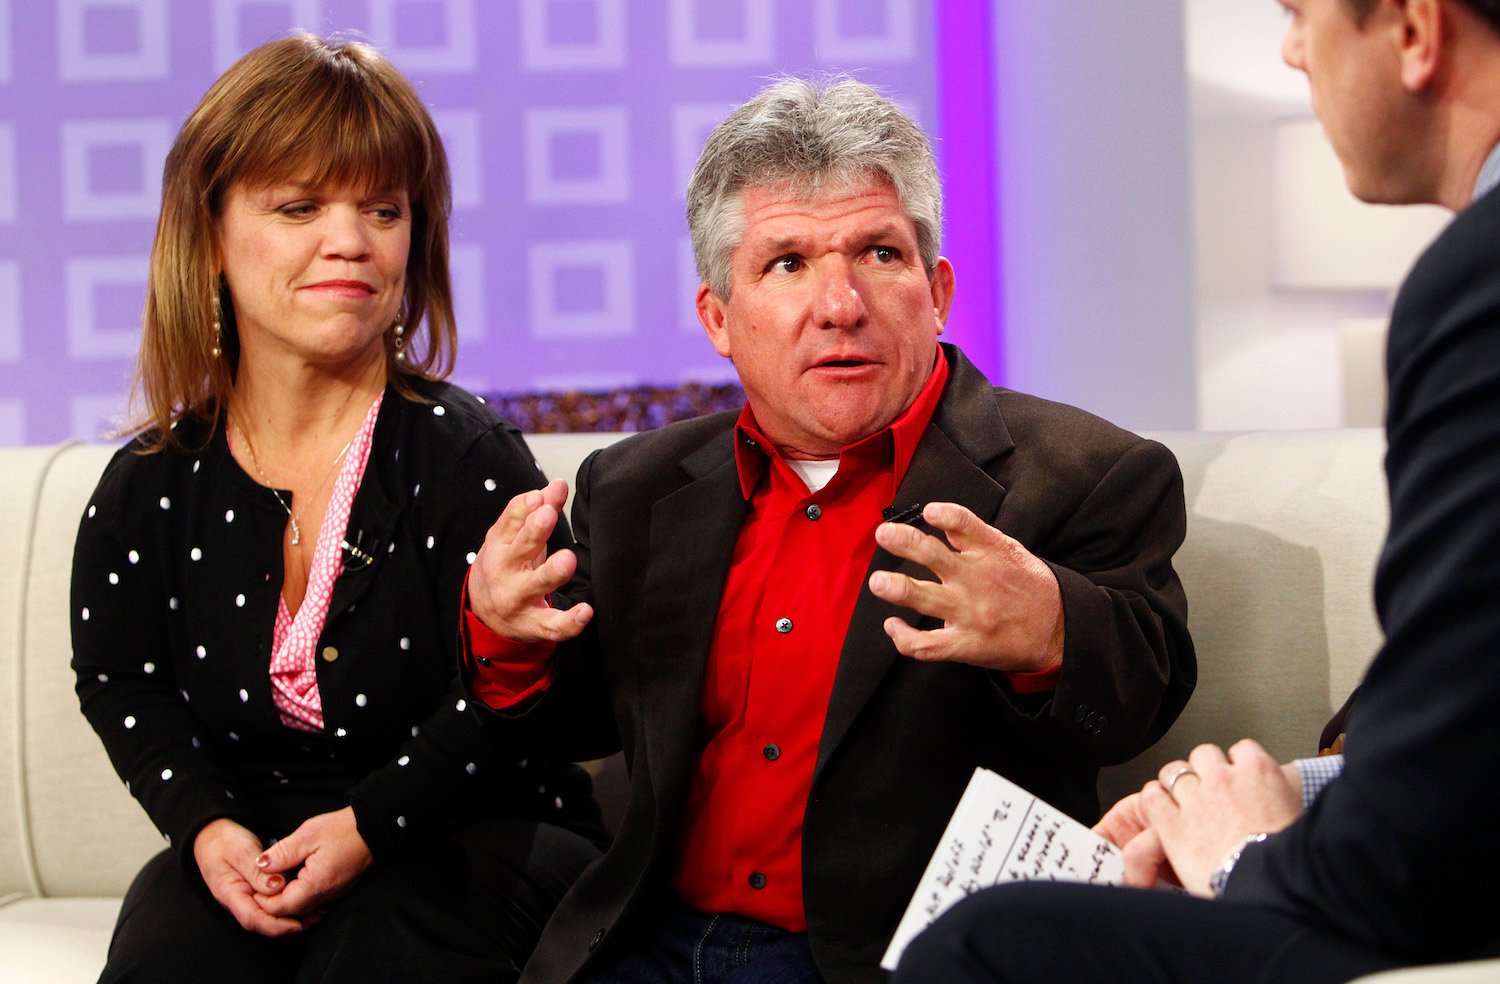 Amy Roloff and Matt Roloff from 'Little People, Big World' talking on a show against a purple background